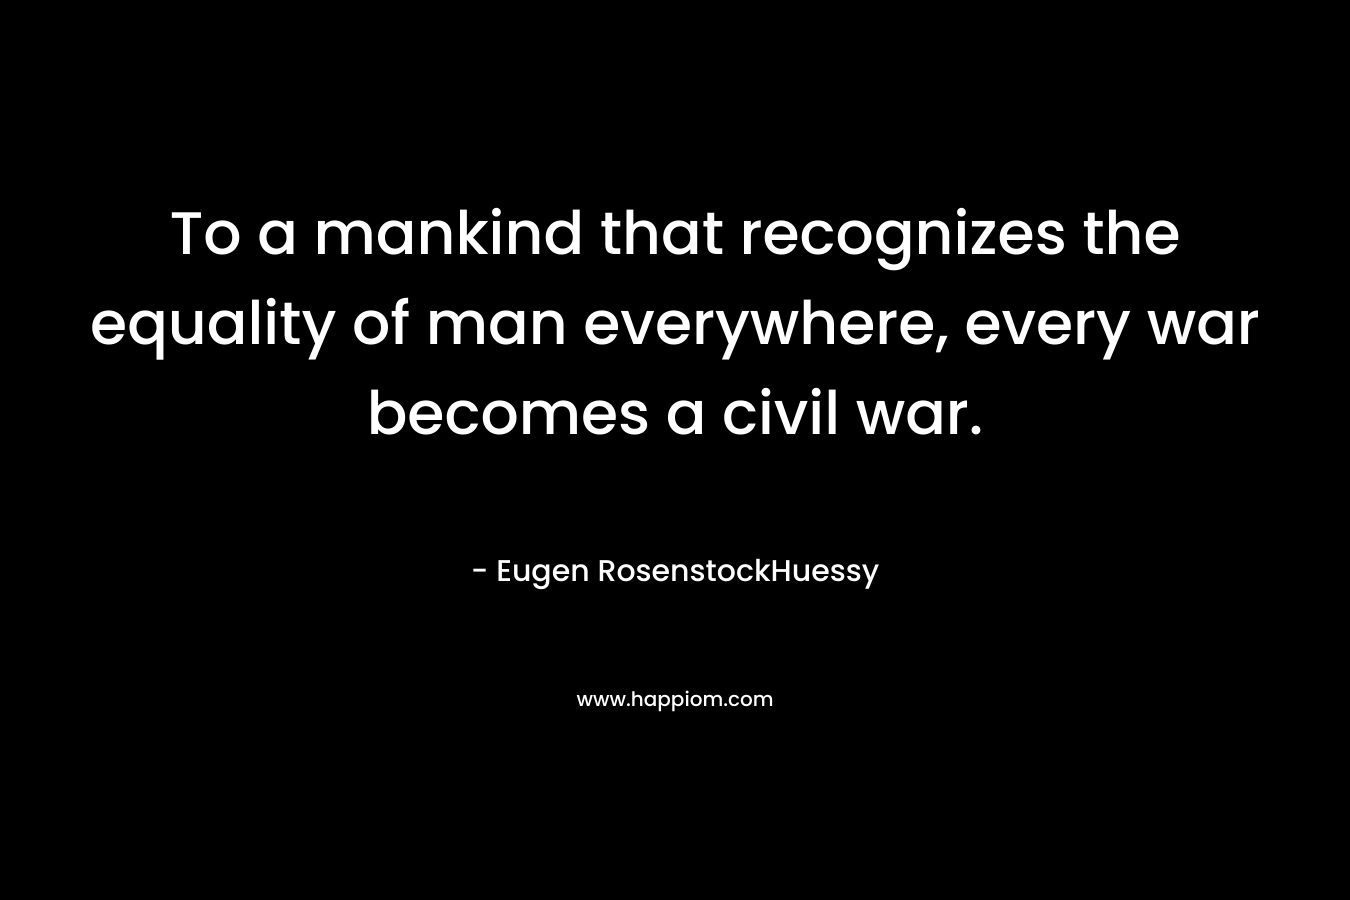 To a mankind that recognizes the equality of man everywhere, every war becomes a civil war. – Eugen RosenstockHuessy